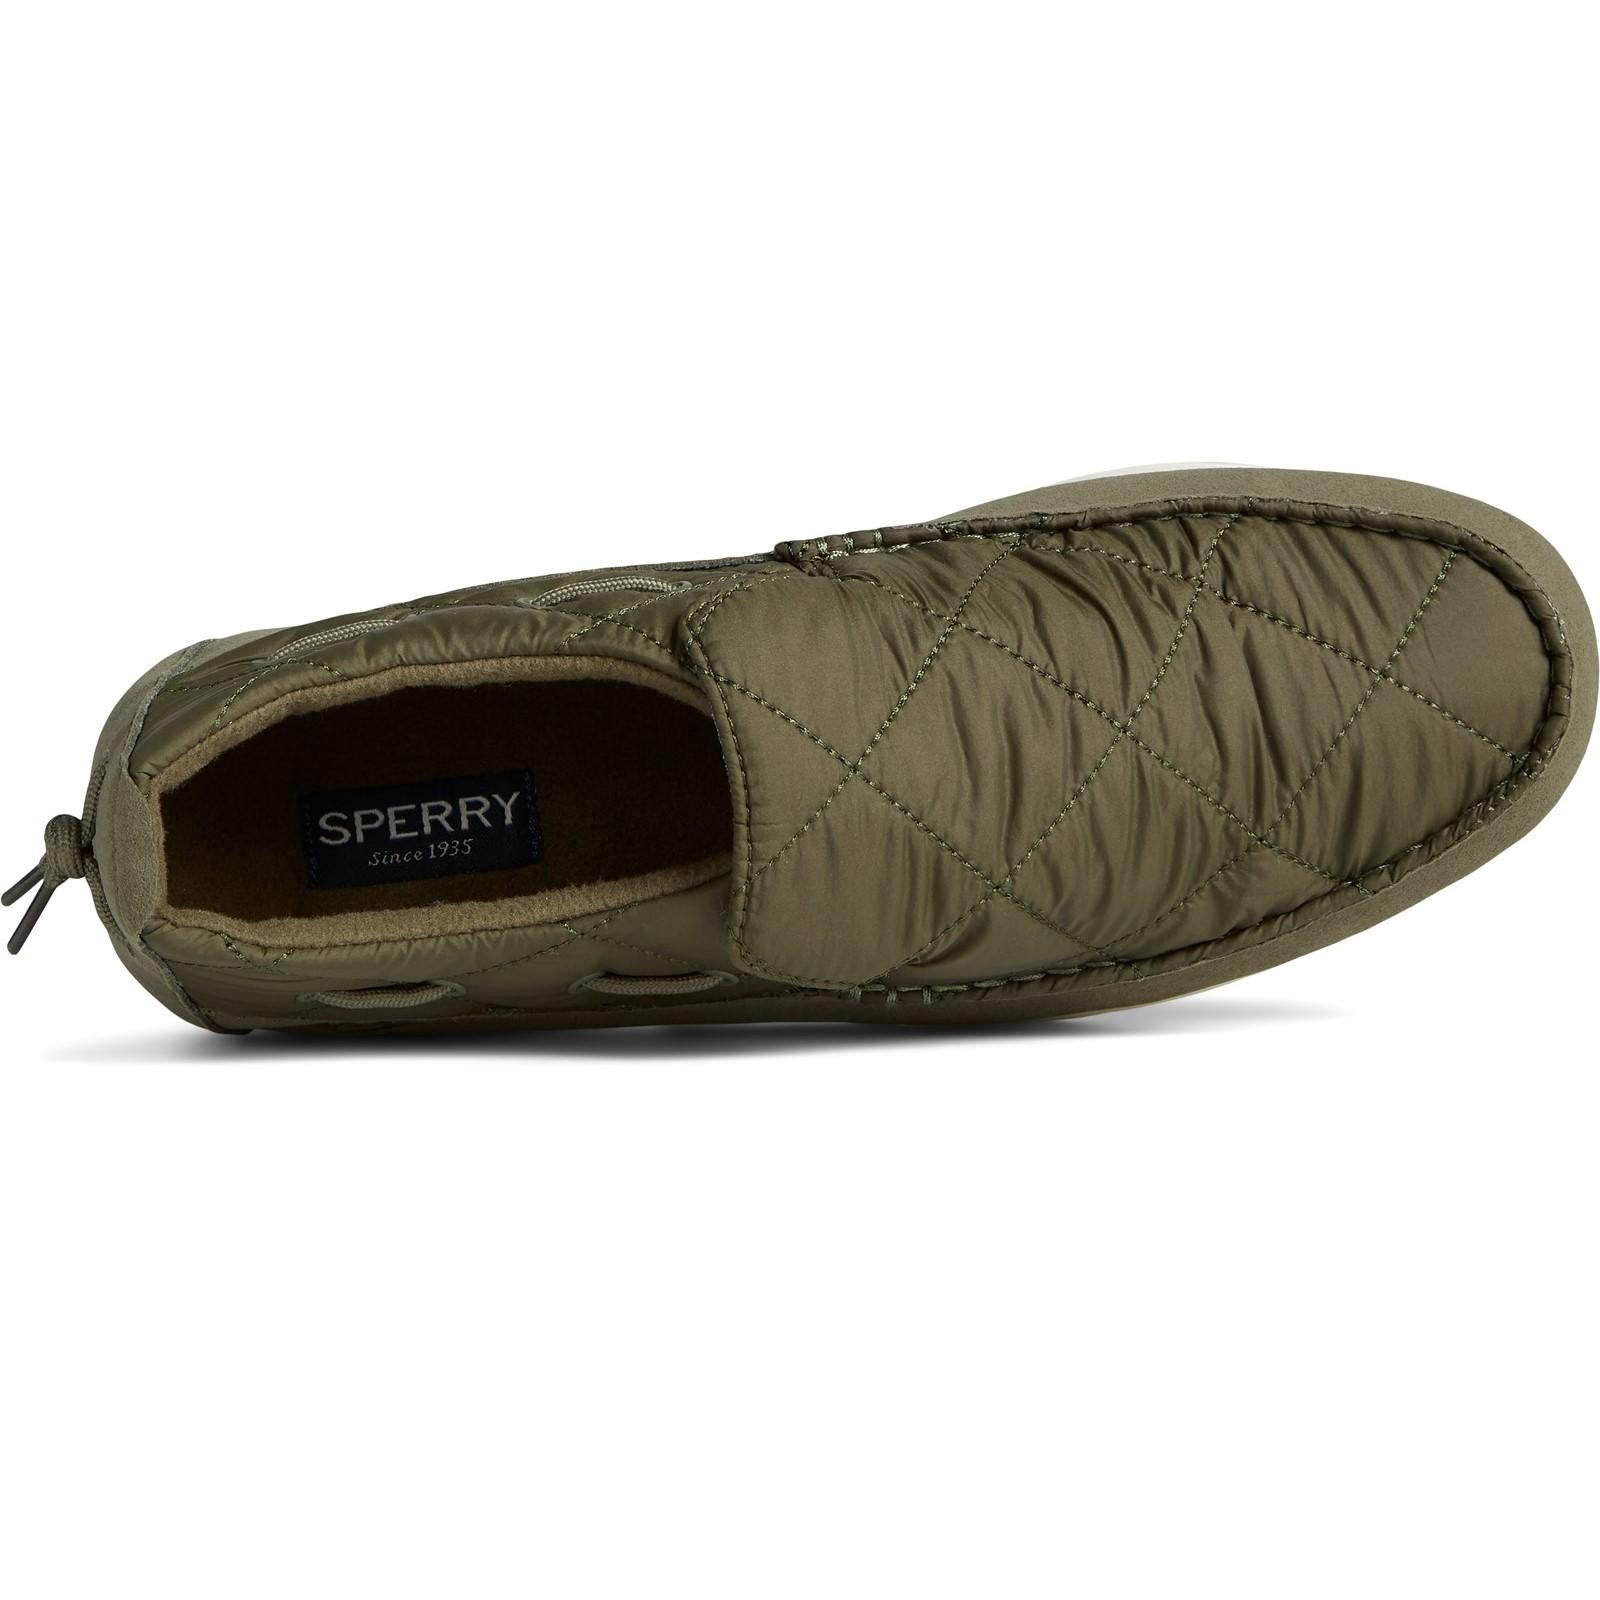 Sperry Top-sider Moc Sider Shoes